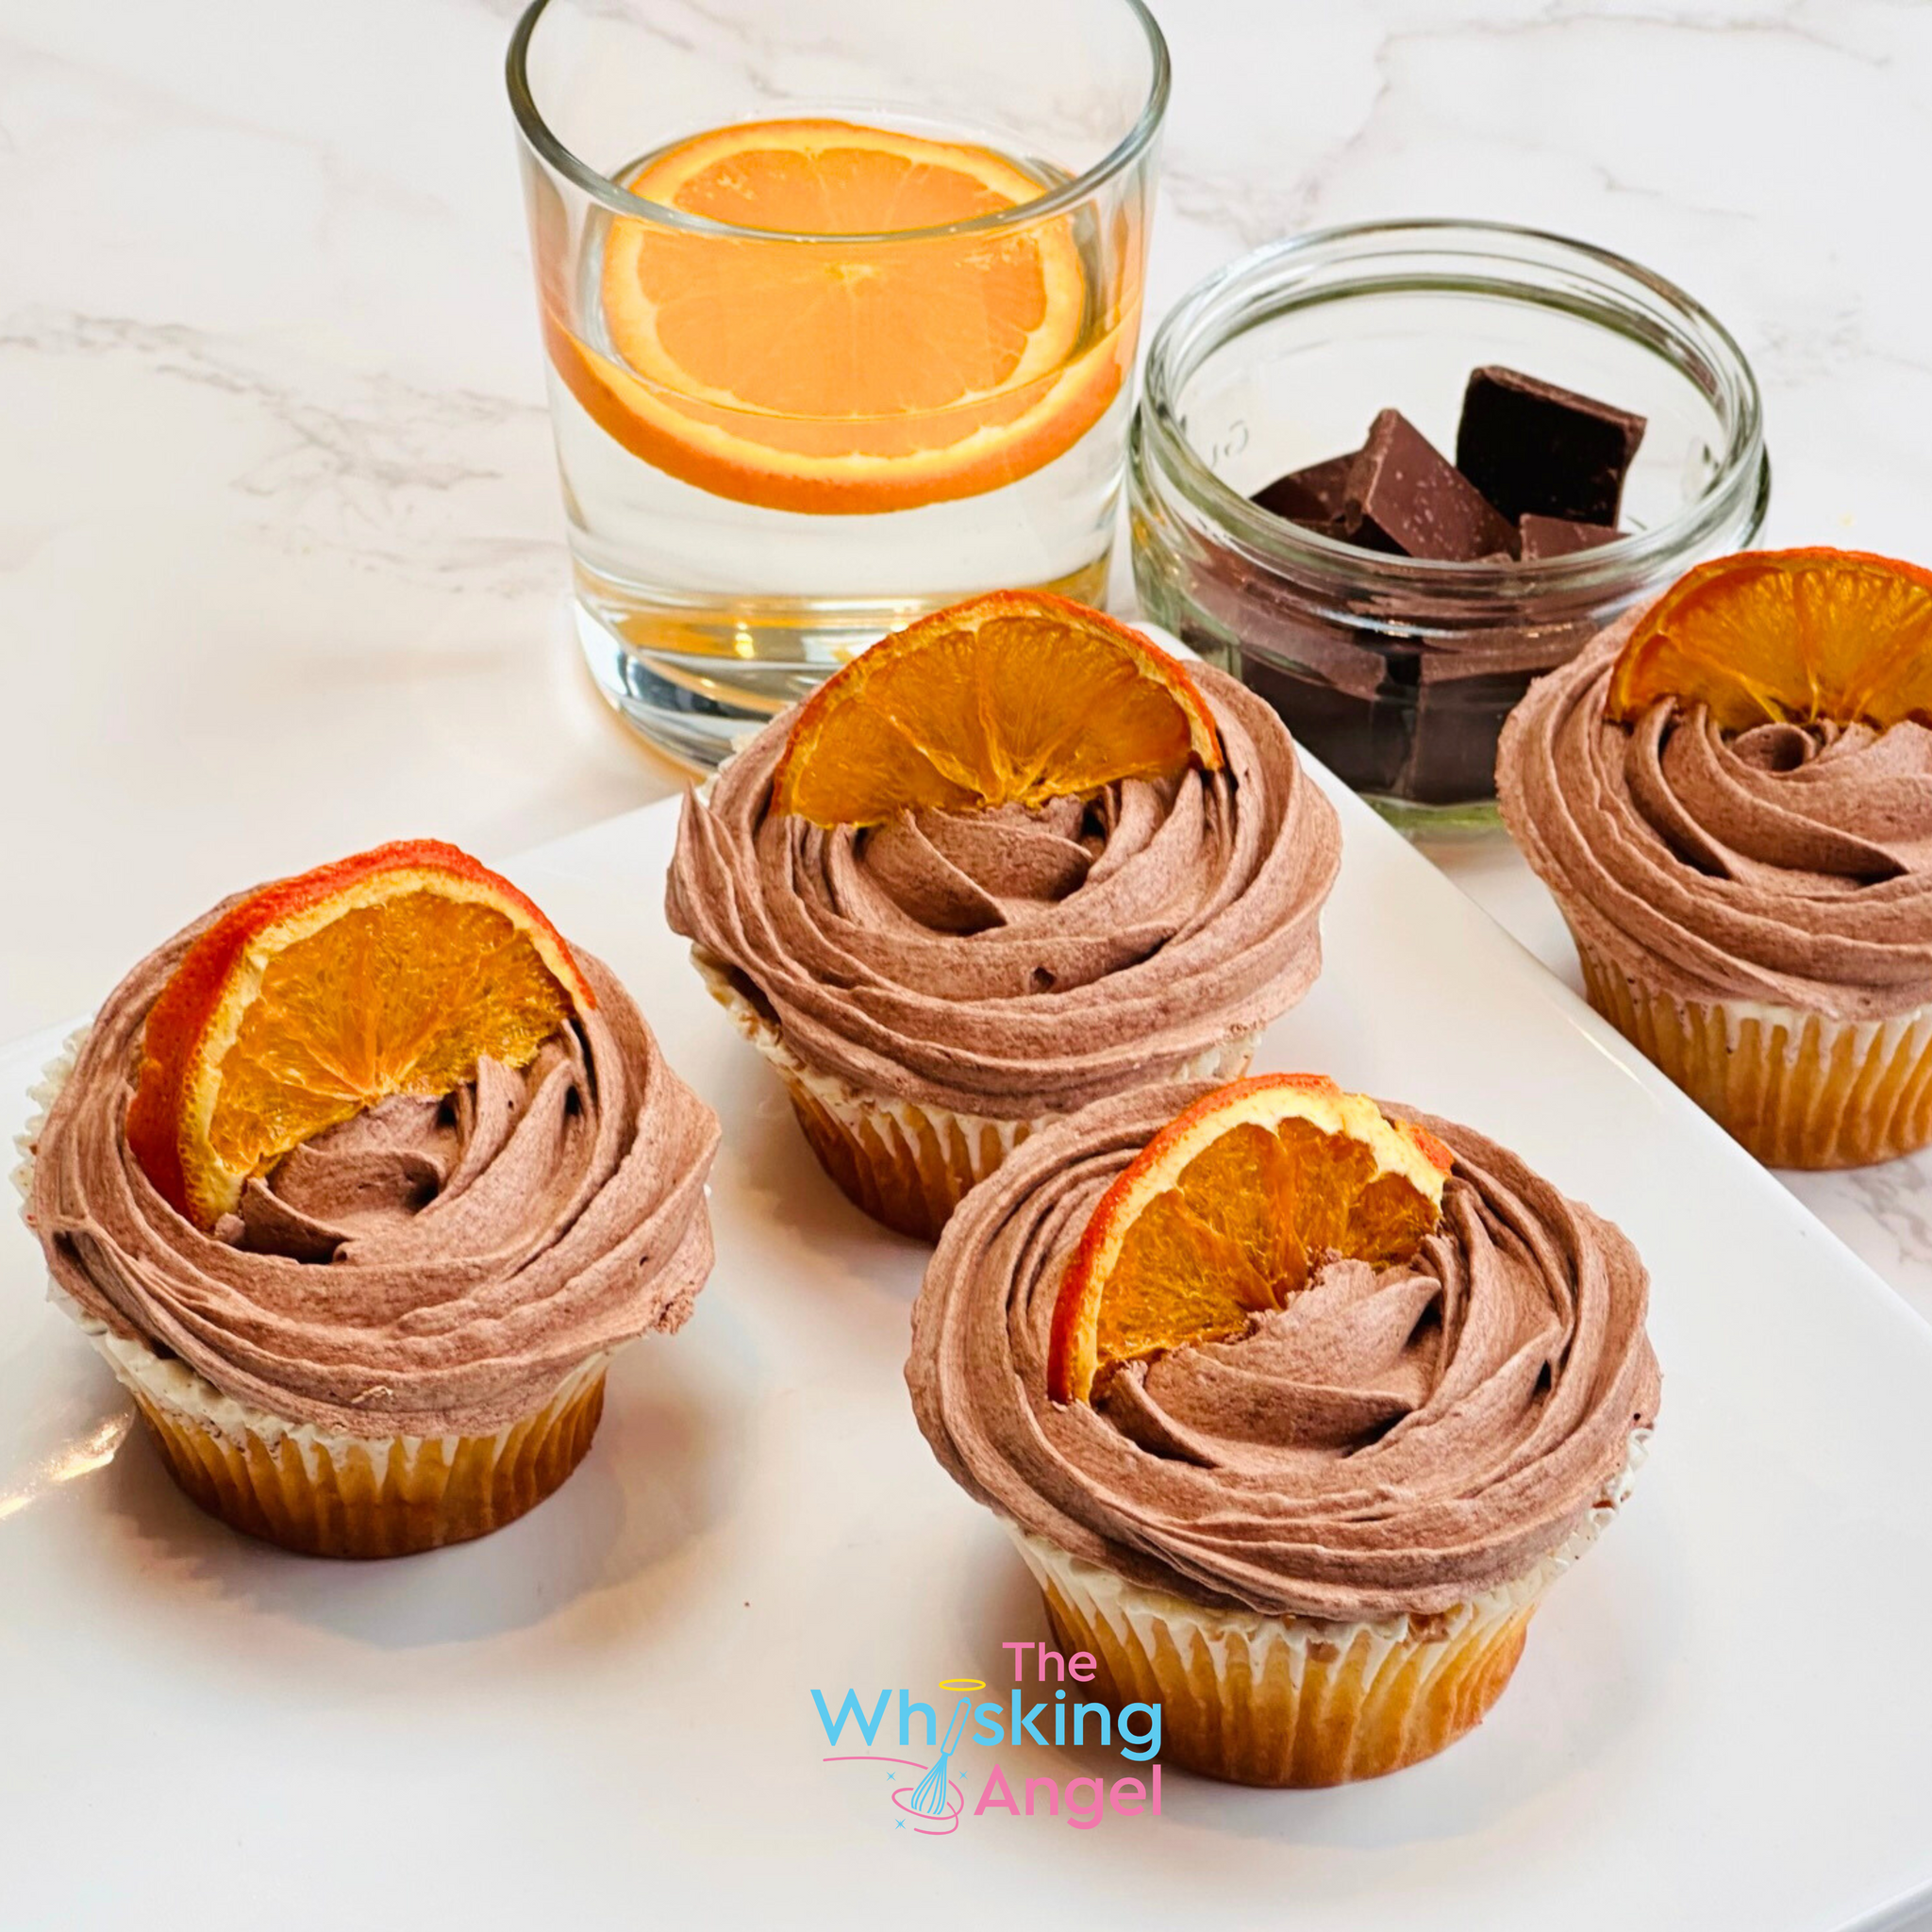 Chocolate & Orange Divine Eggless Cupcakes: A Blissful Treat for Your Taste Buds